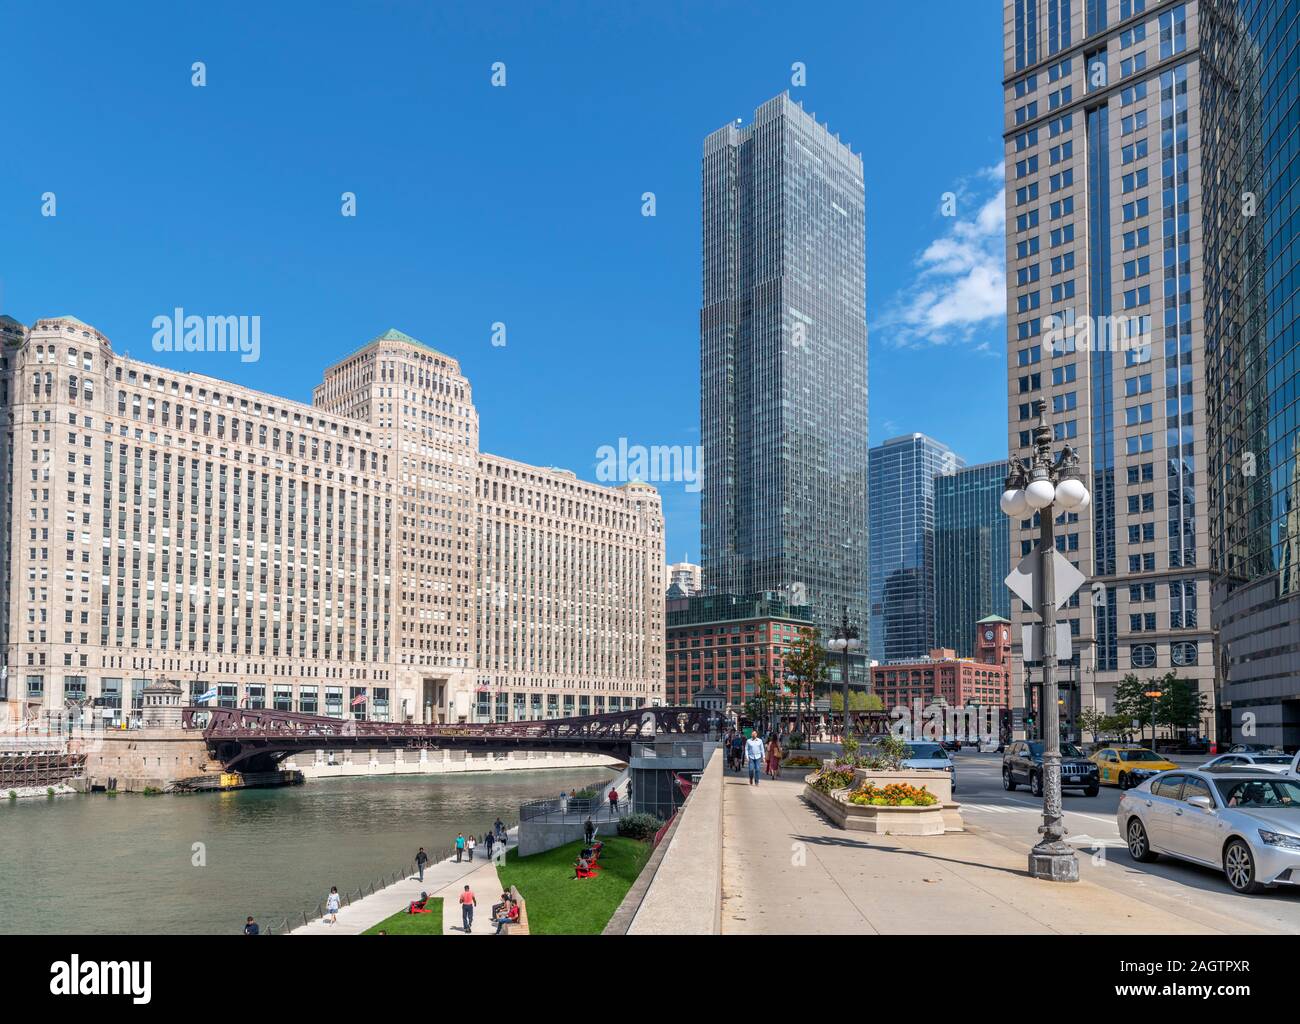 Chicago, Art Deco. Riverwalk and Chicago River along W Wacker Drive looking towards the Merchandise Mart building, Chicago, Illinois, USA Stock Photo